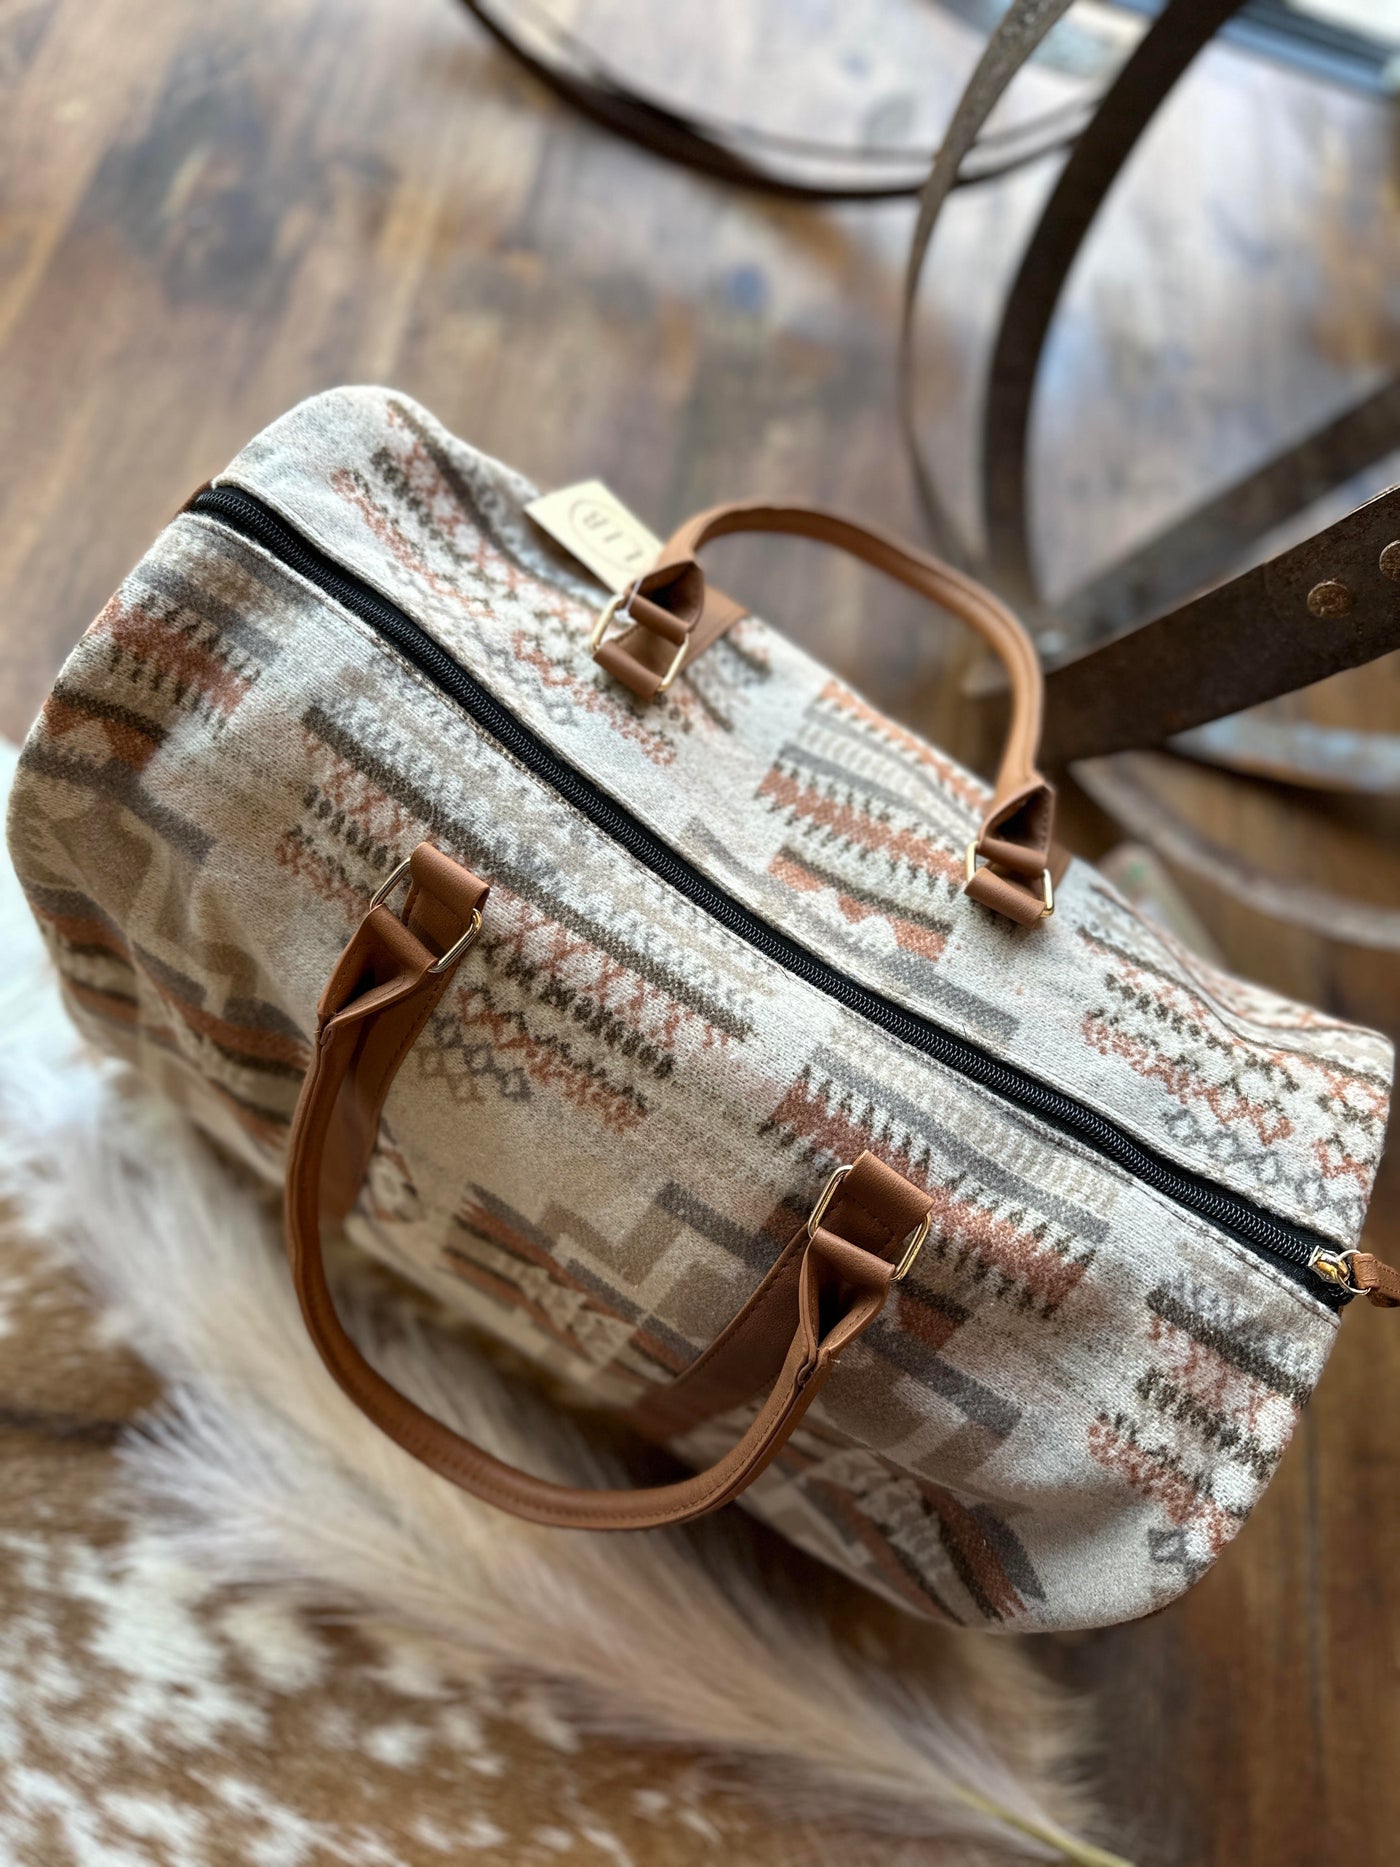 Mittens Neutral-Colored Aztec Duffle Bag